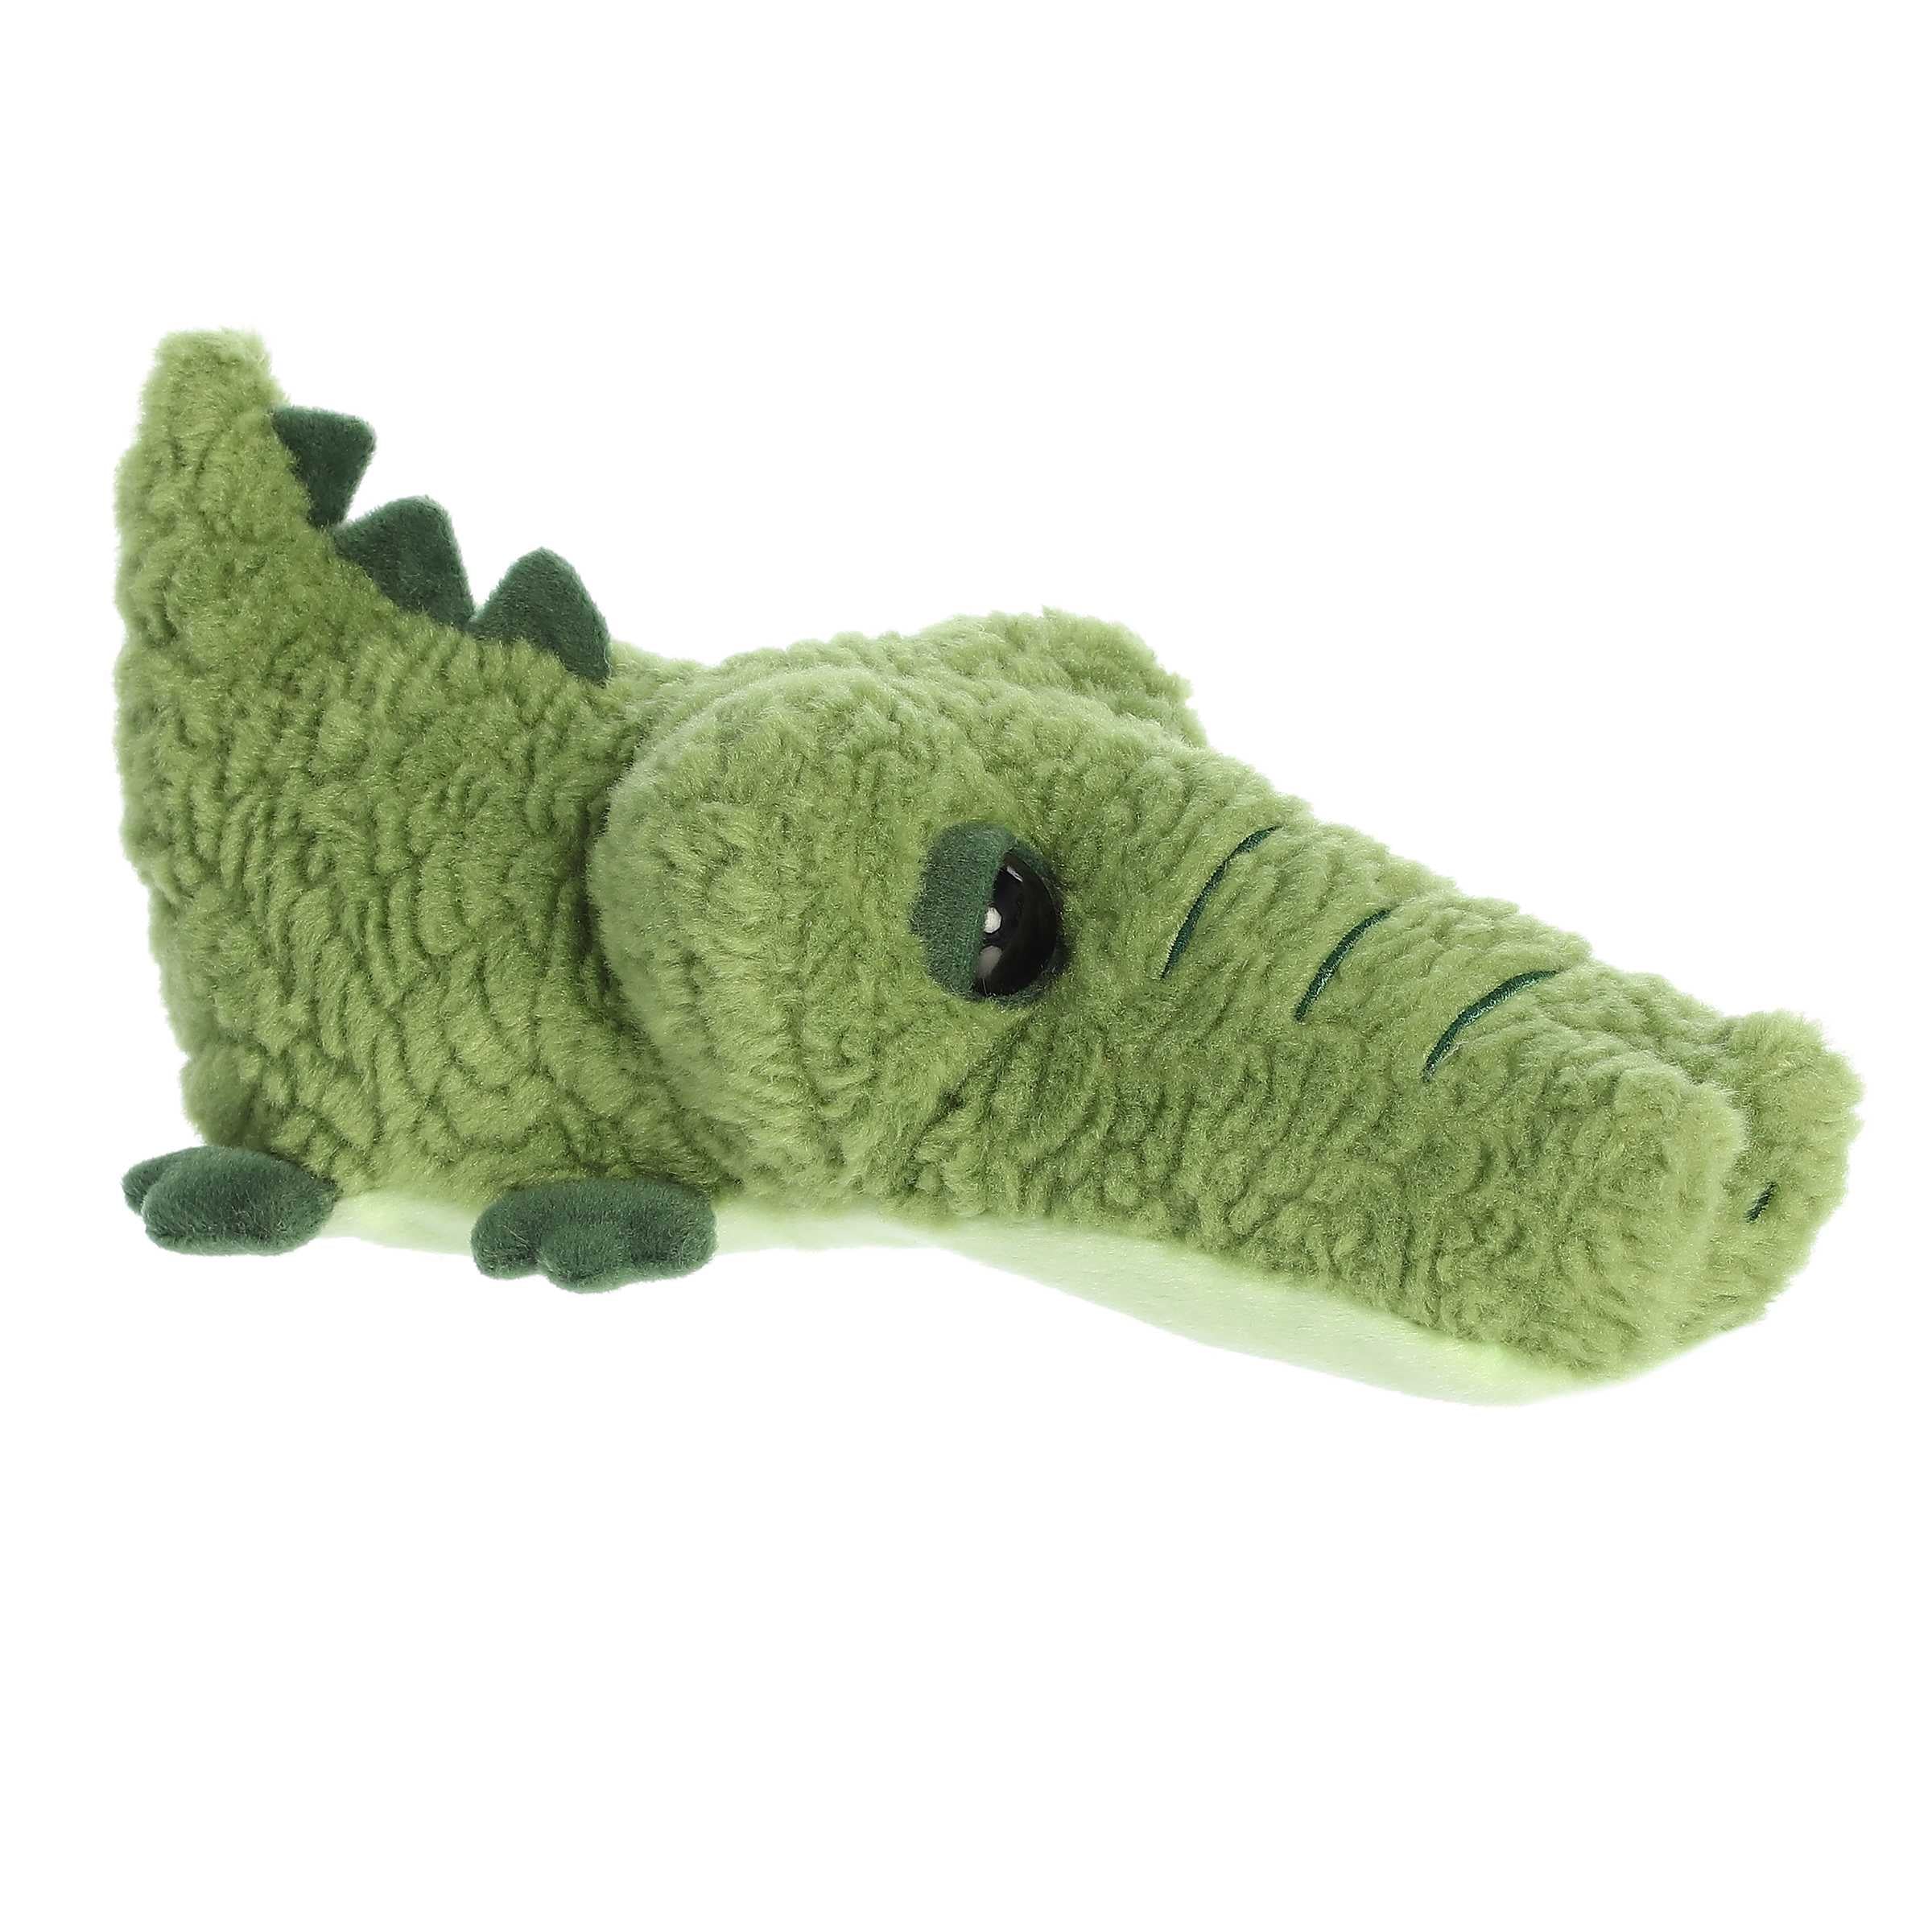 Arlie Alligator from Schnozzles, featuring a unique snout and soft green fur, ideal for imaginative play and cozy cuddles